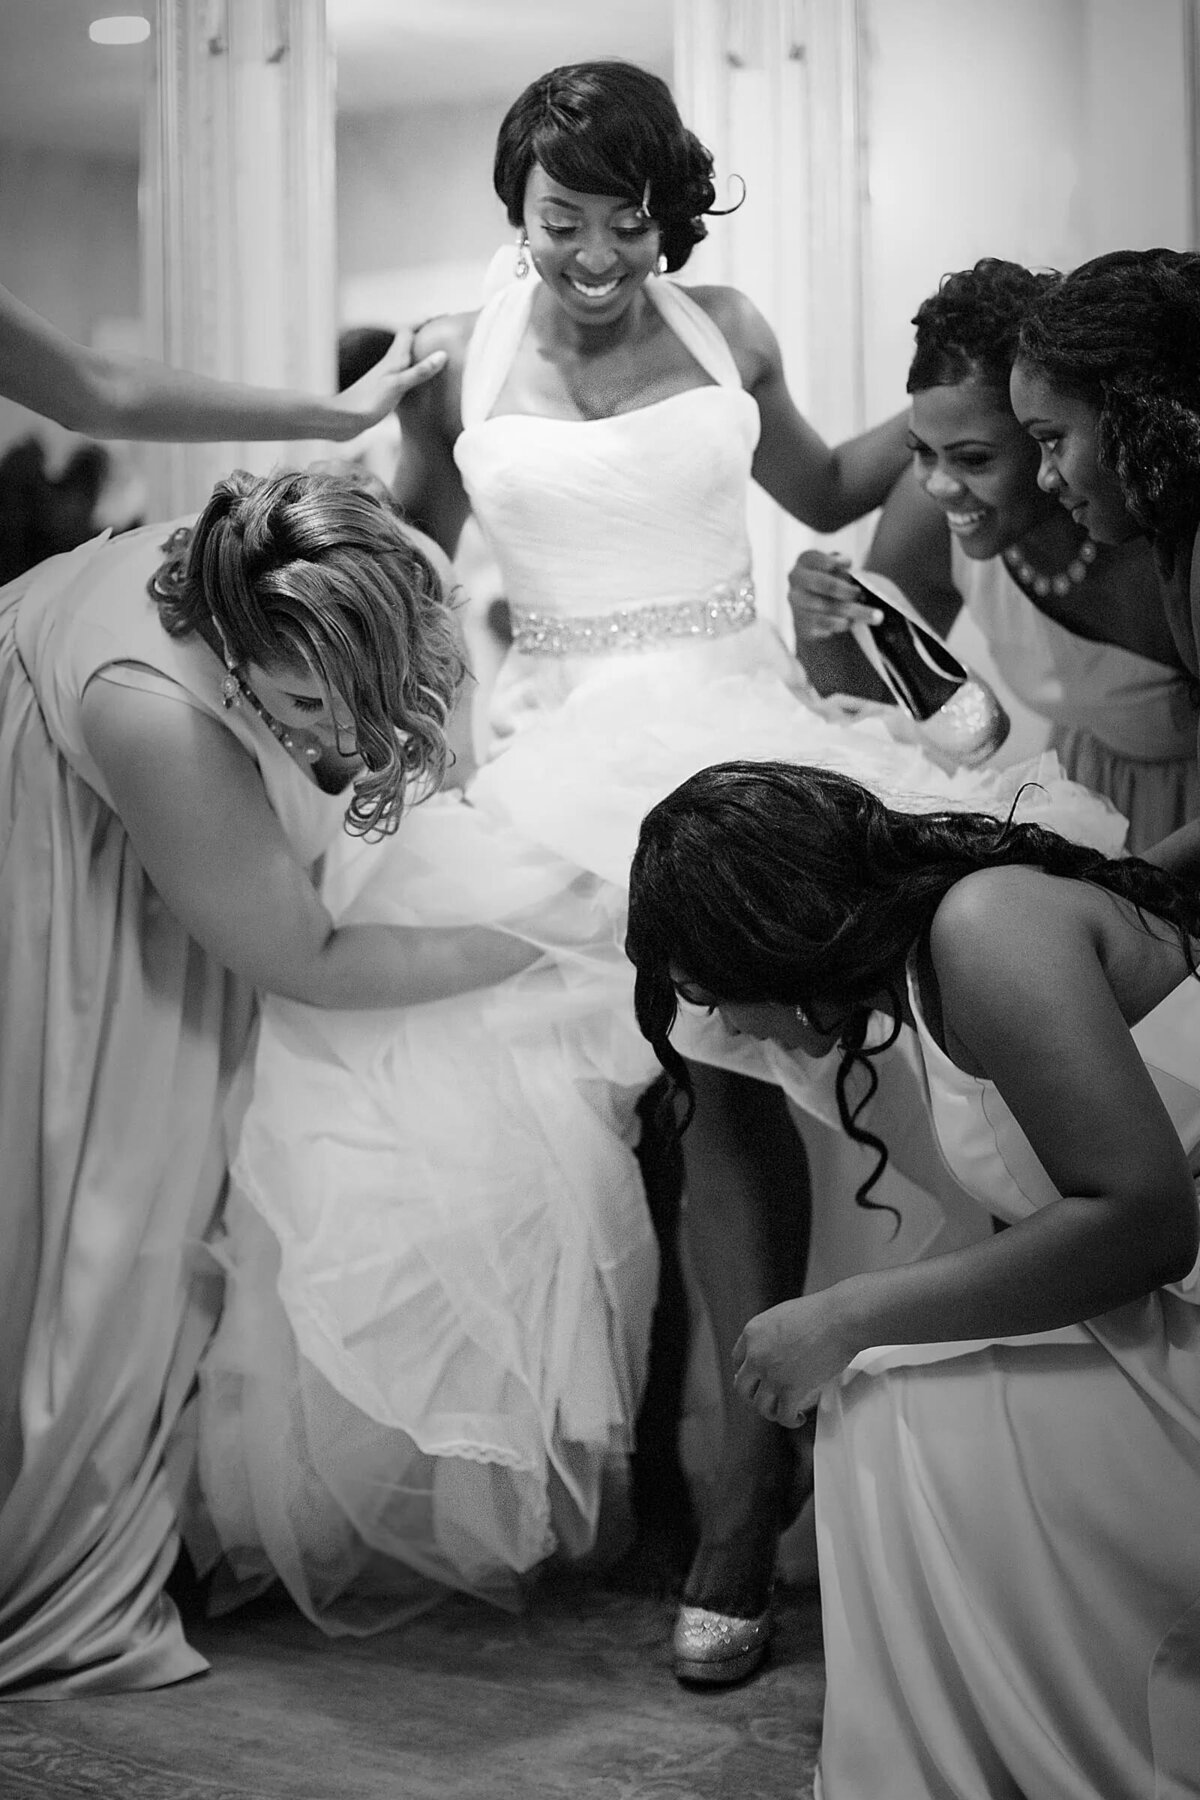 A candid moment in black and white where bridesmaids joyfully help the bride with her dress